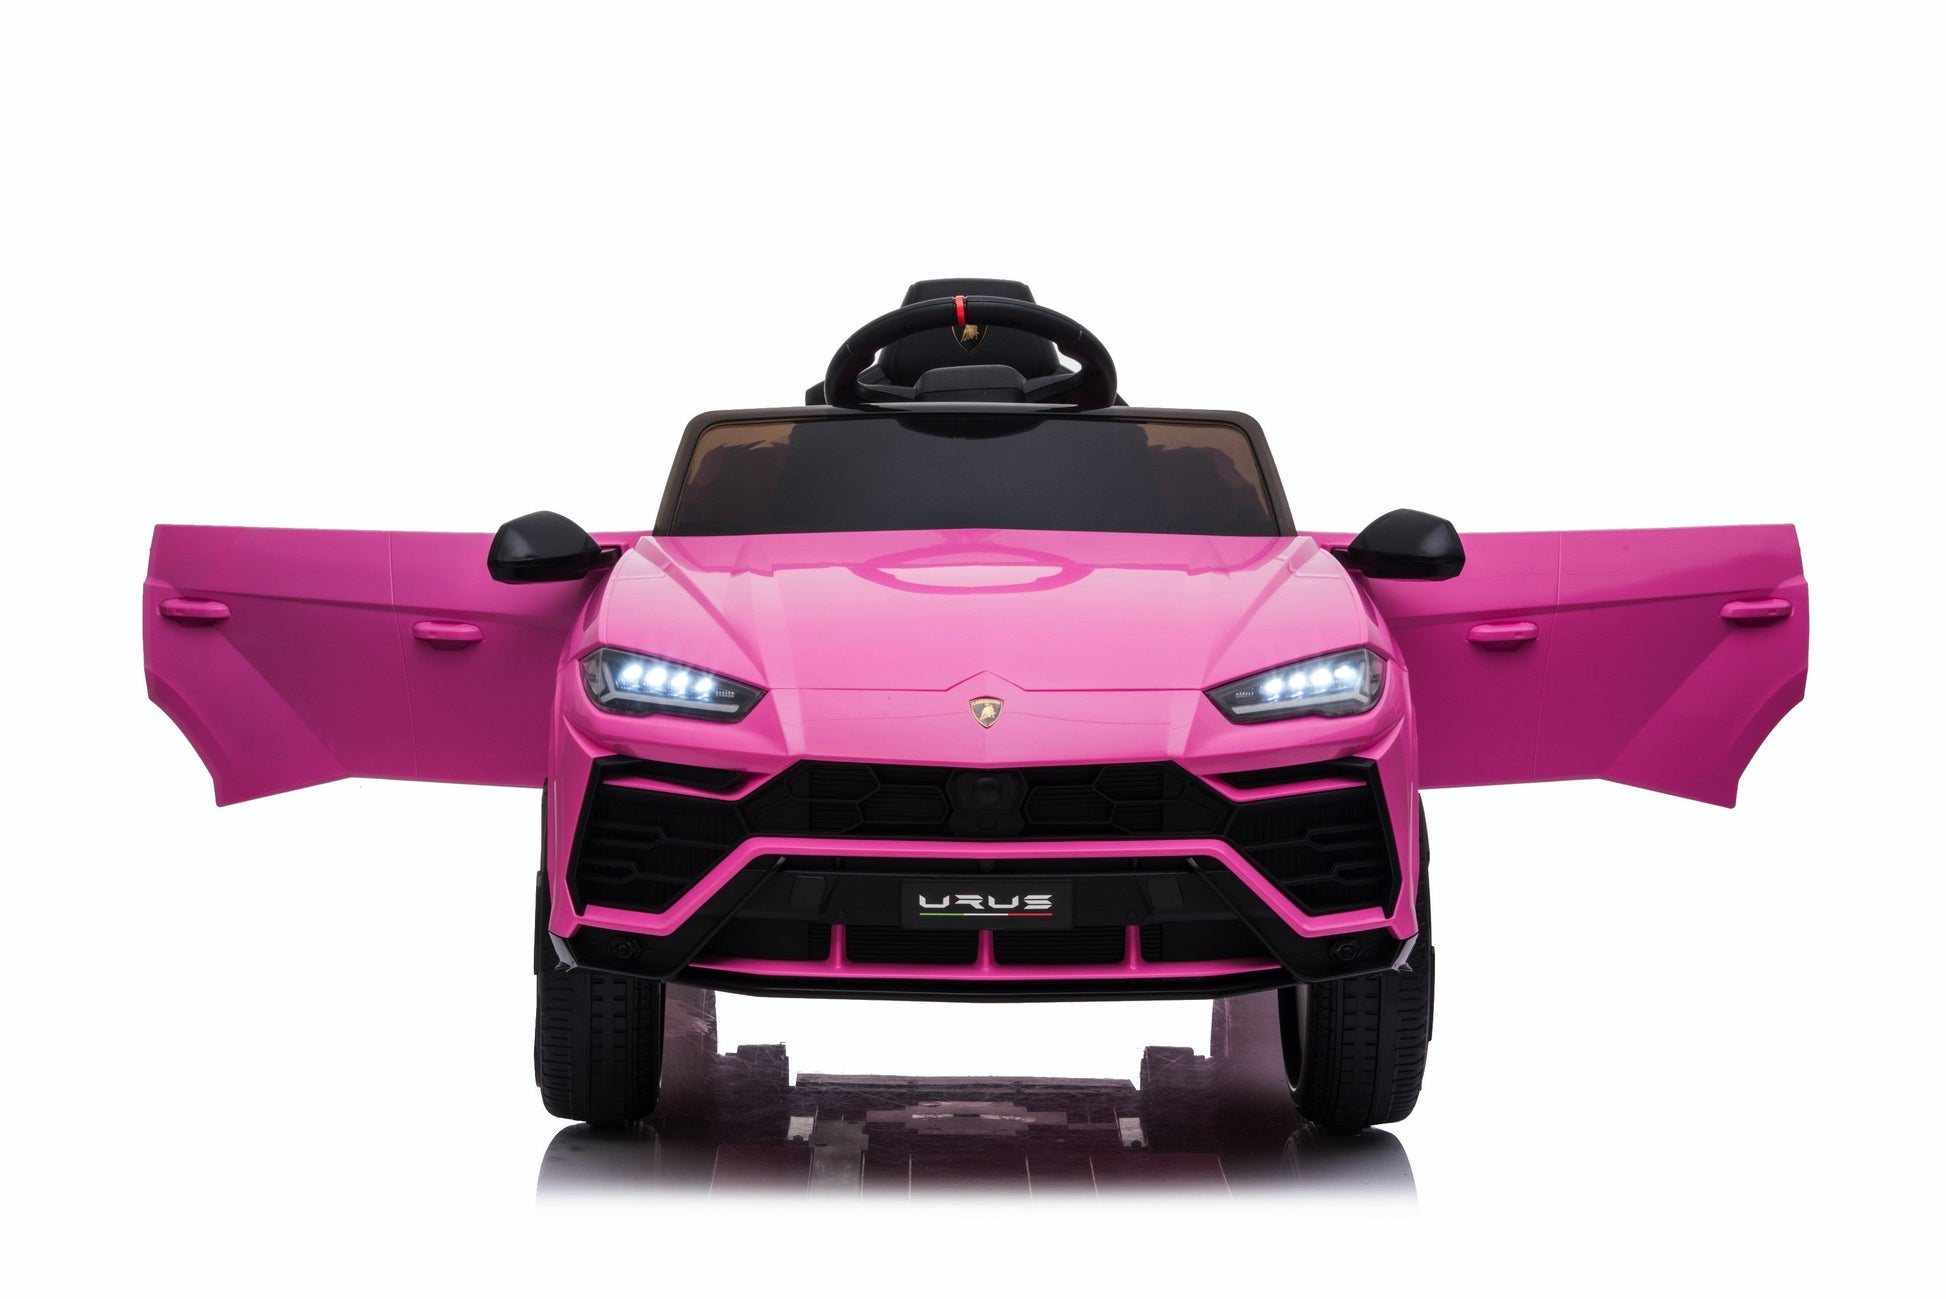 Pink Lamborghini Urus Toy SUV with open doors for kids, electric powered, isolated on white